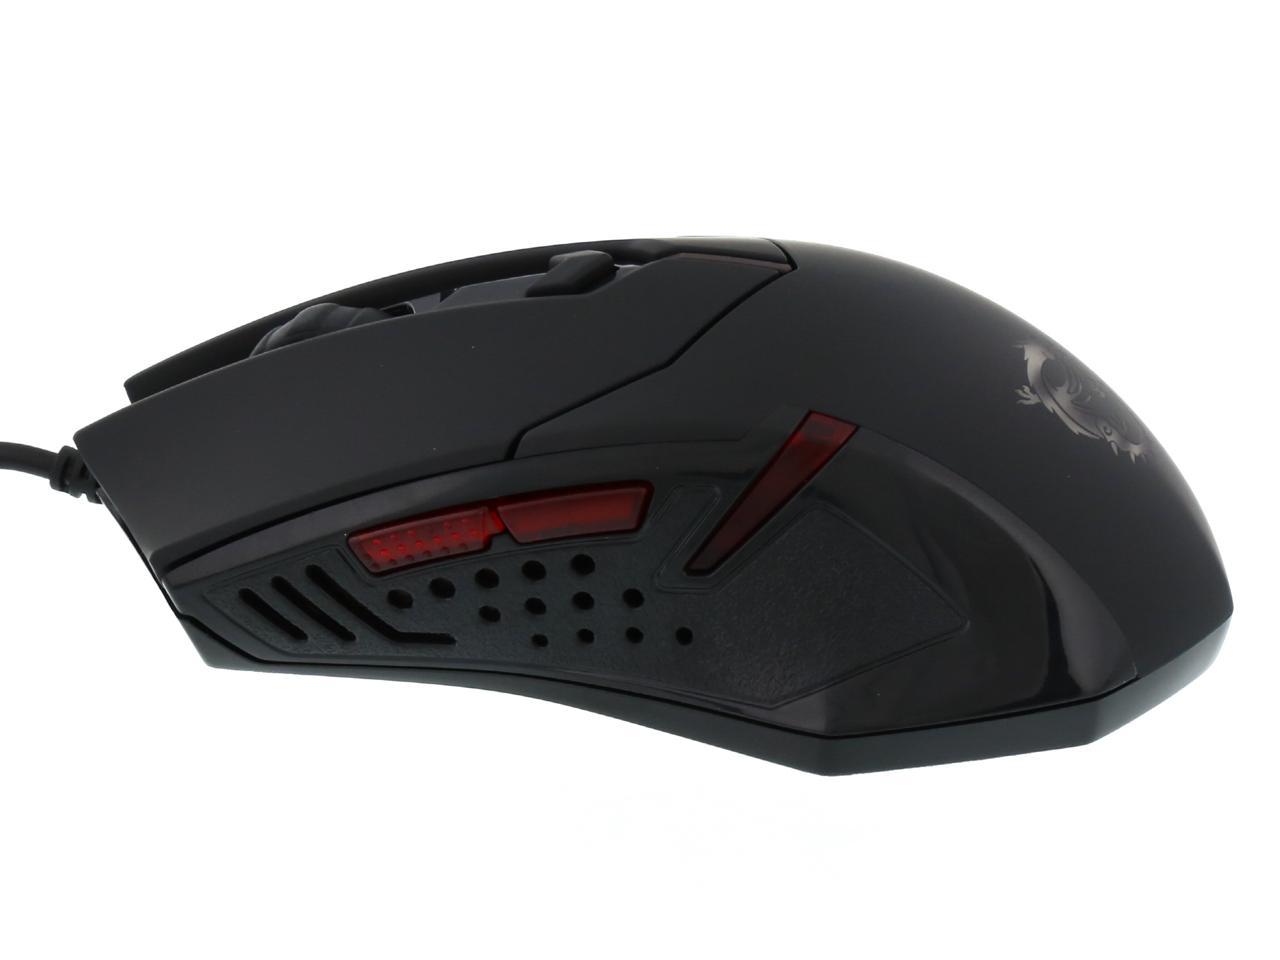 msi interceptor ds b1 optical gaming mouse review